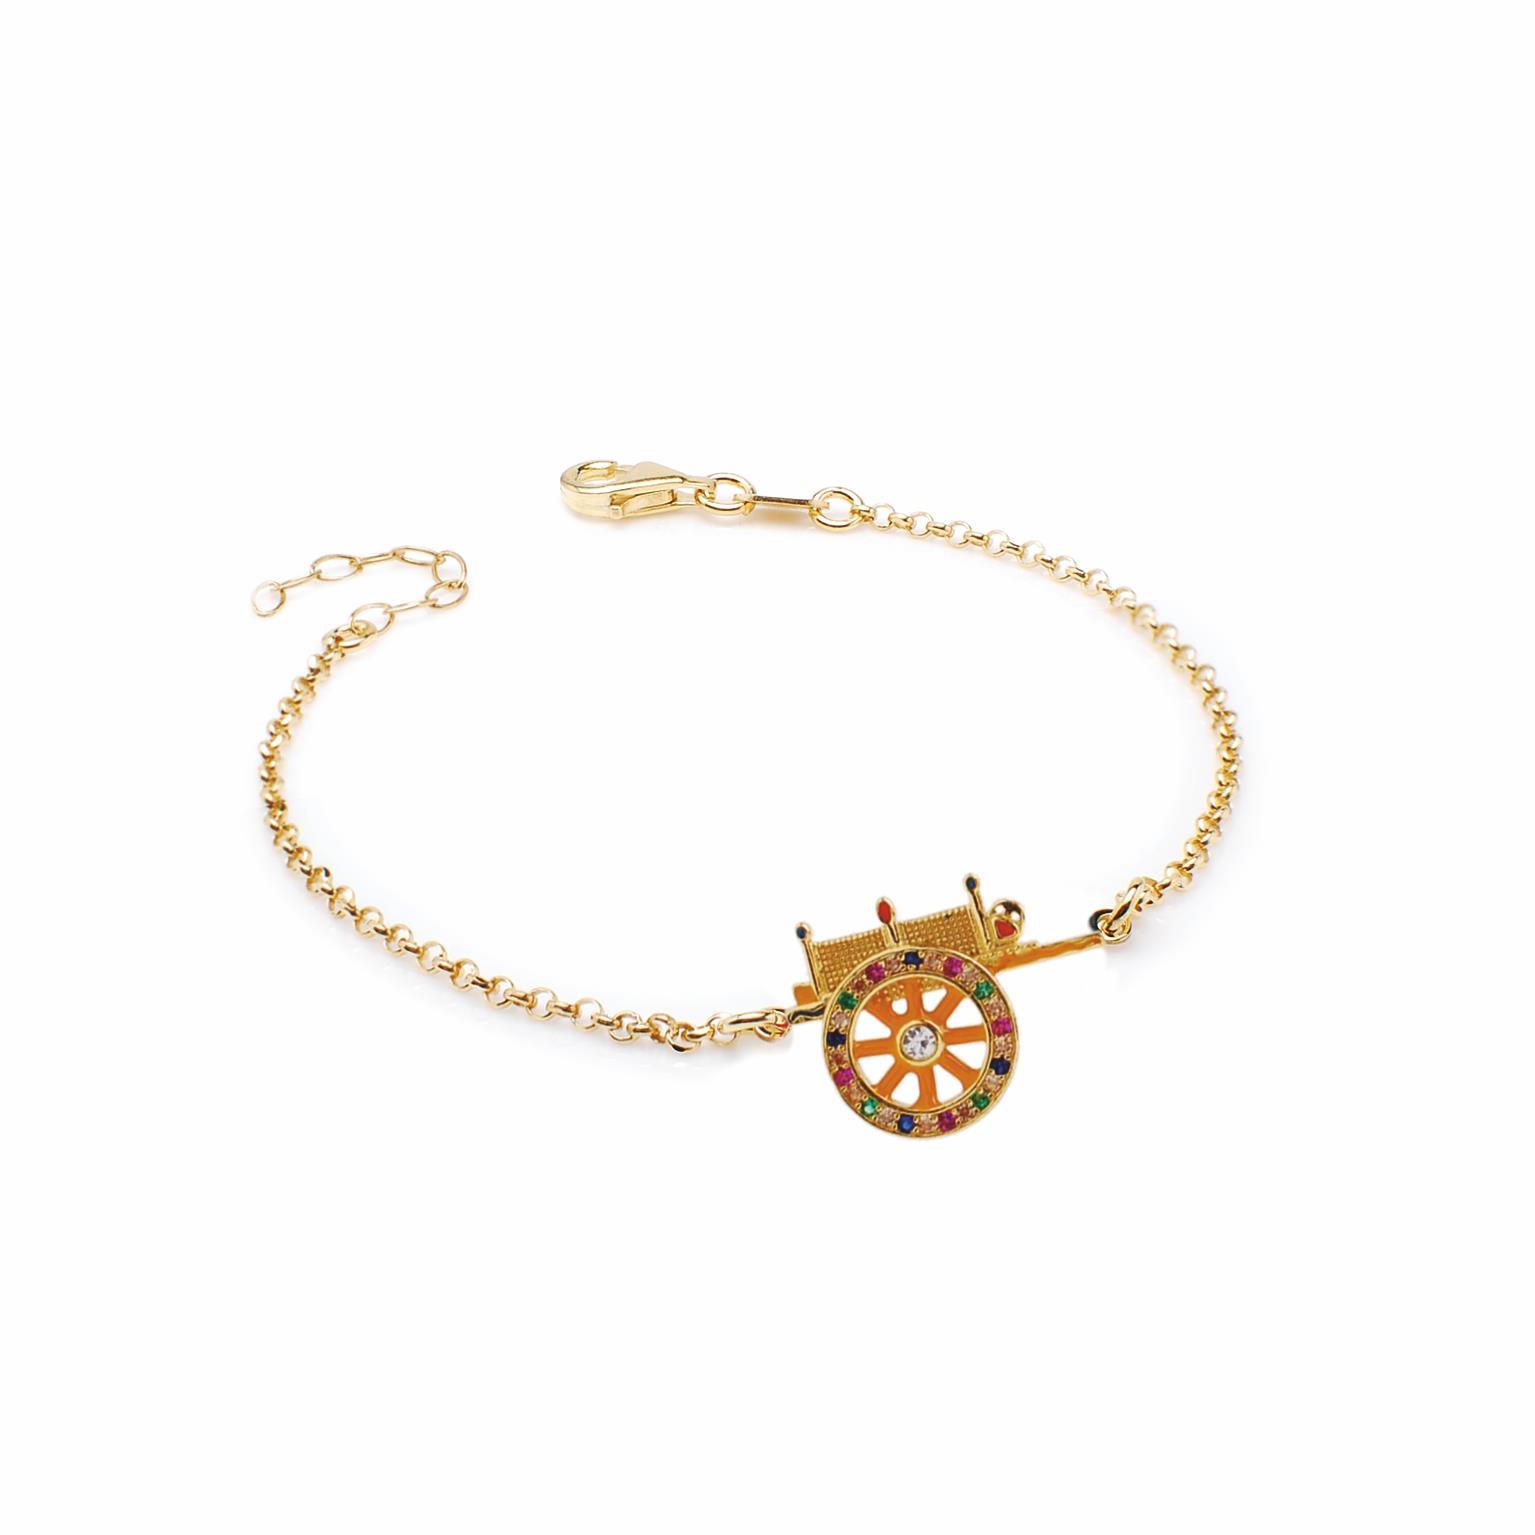 Golden silver bracelet with Sicilian cart symbol pendant with enamel and colored zircons - MY SICILY